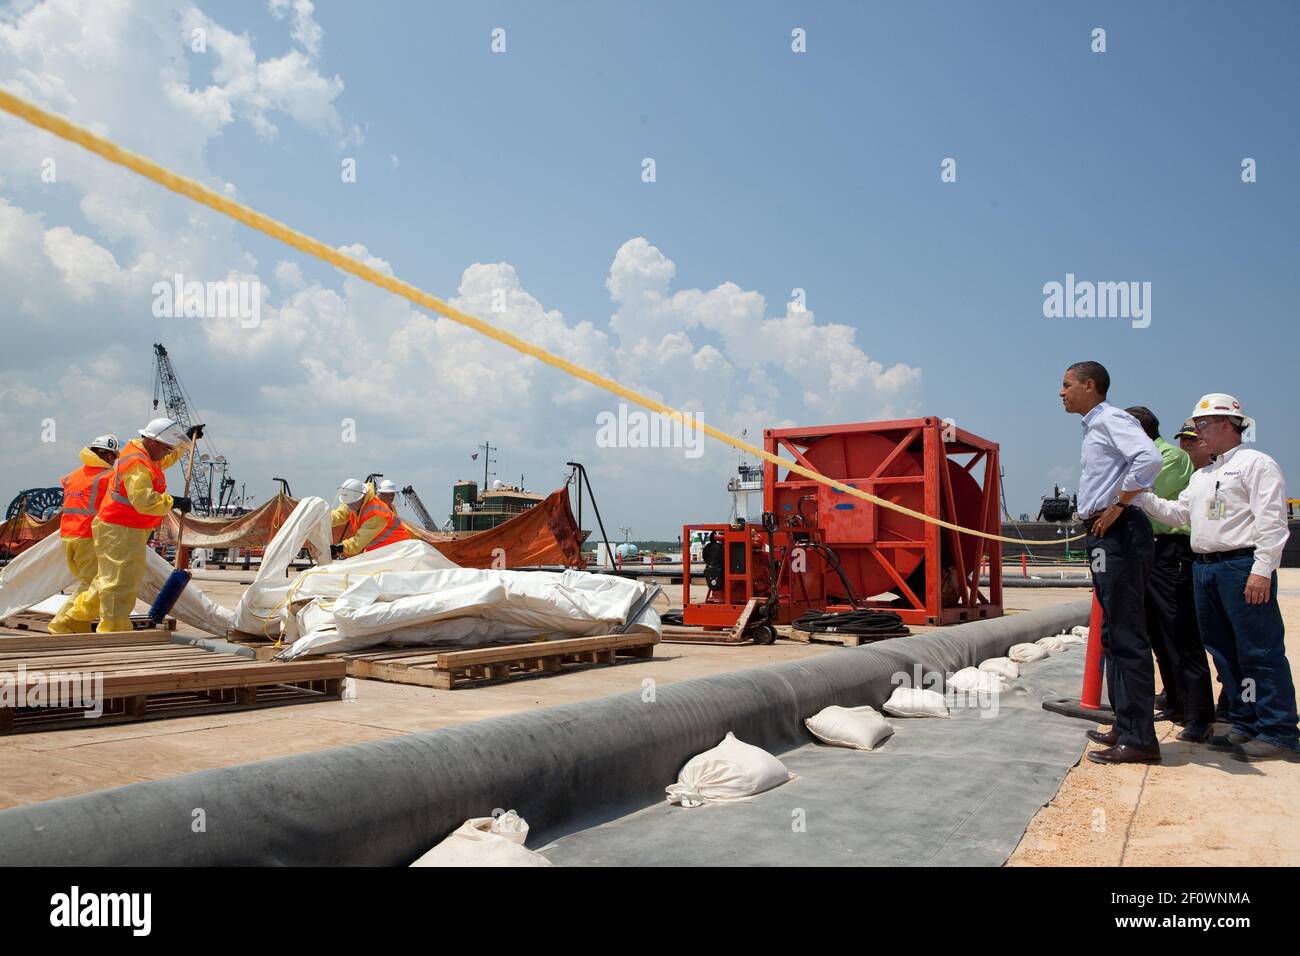 President Barack Obama observes operations at the Theodore Staging Facility in Theodore, Ala., June 14, 2010, where oil containment boom and other equipment is cleaned, decontaminated, and repaired in aftermath of BP Oil Spill Stock Photo